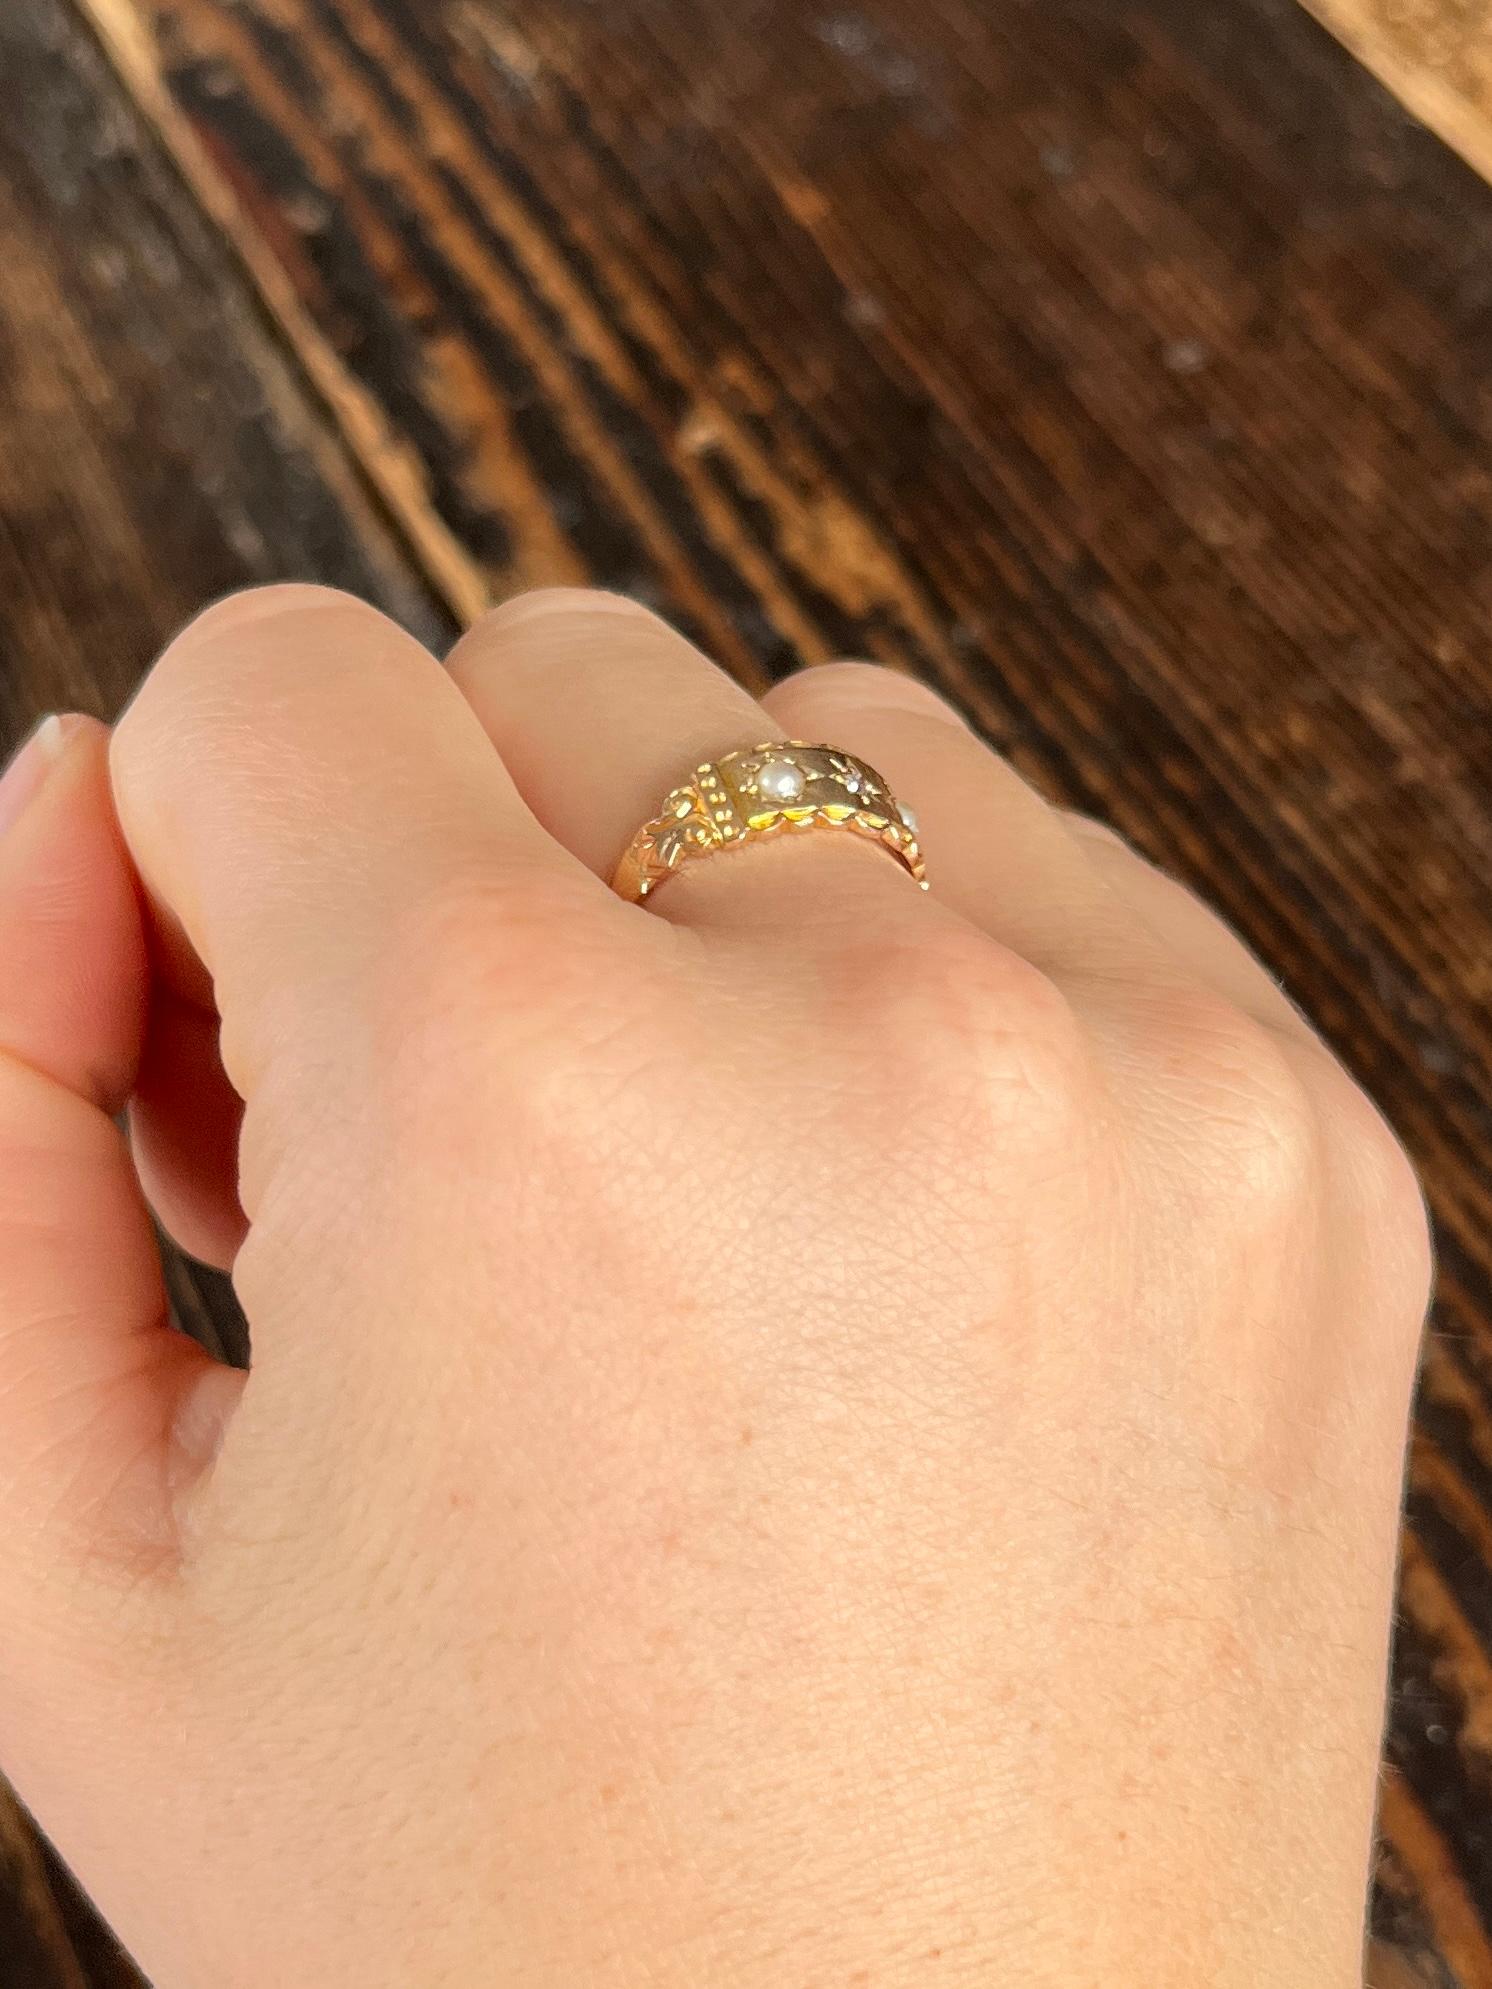 This wide 15ct gold band holds two lovely pearls that sit in either side of a sparkly 3pt diamond. Hallmarked Chester 1894.

Ring Size: N or 6 3/4
Band Width: 7mm

Weight: 2.1g